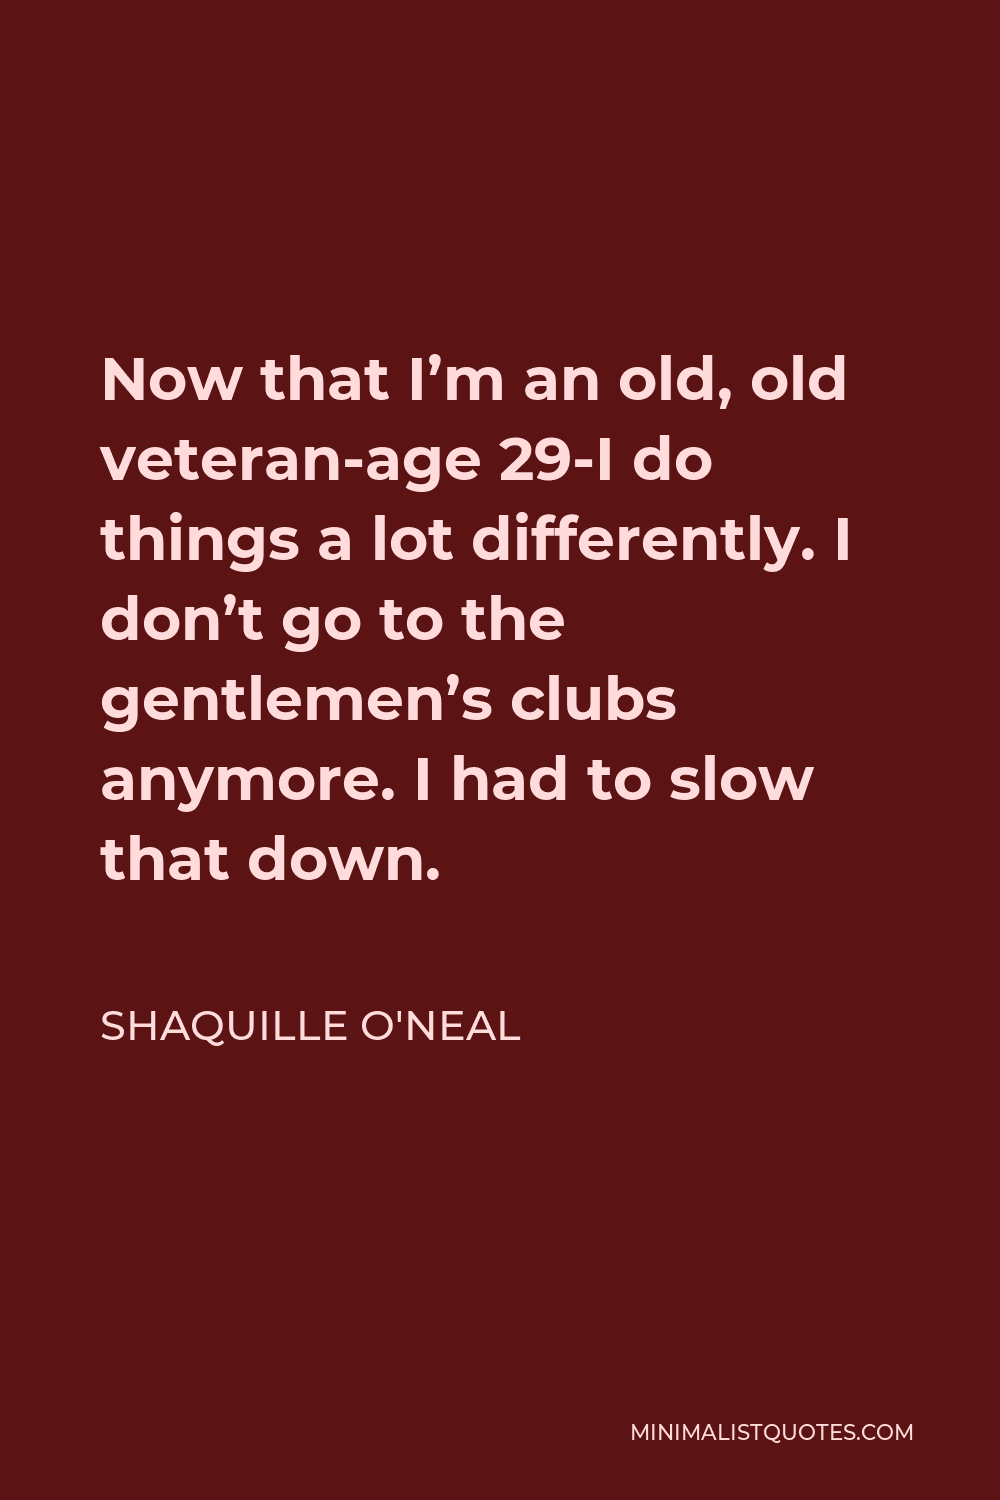 Shaquille O'Neal Quote - Now that I’m an old, old veteran-age 29-I do things a lot differently. I don’t go to the gentlemen’s clubs anymore. I had to slow that down.